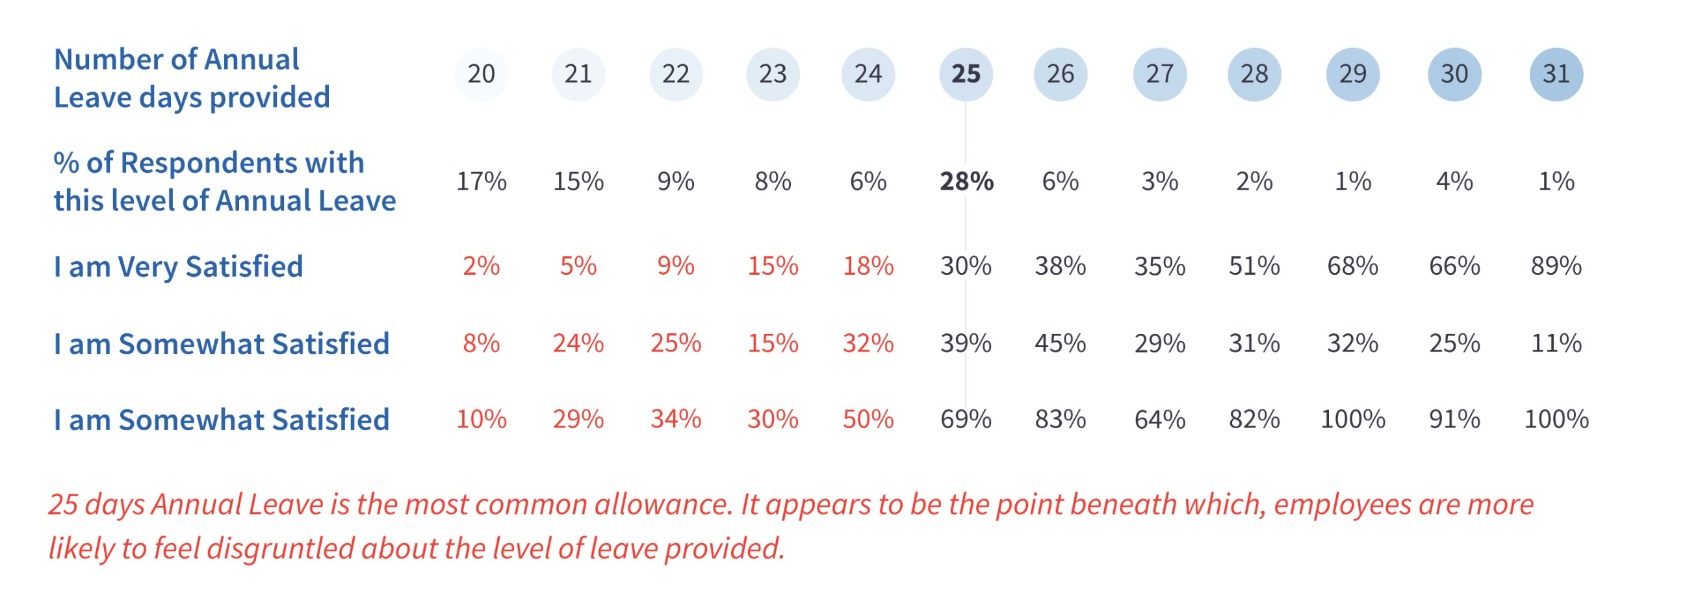 image of survey results for annual leave satisfaction